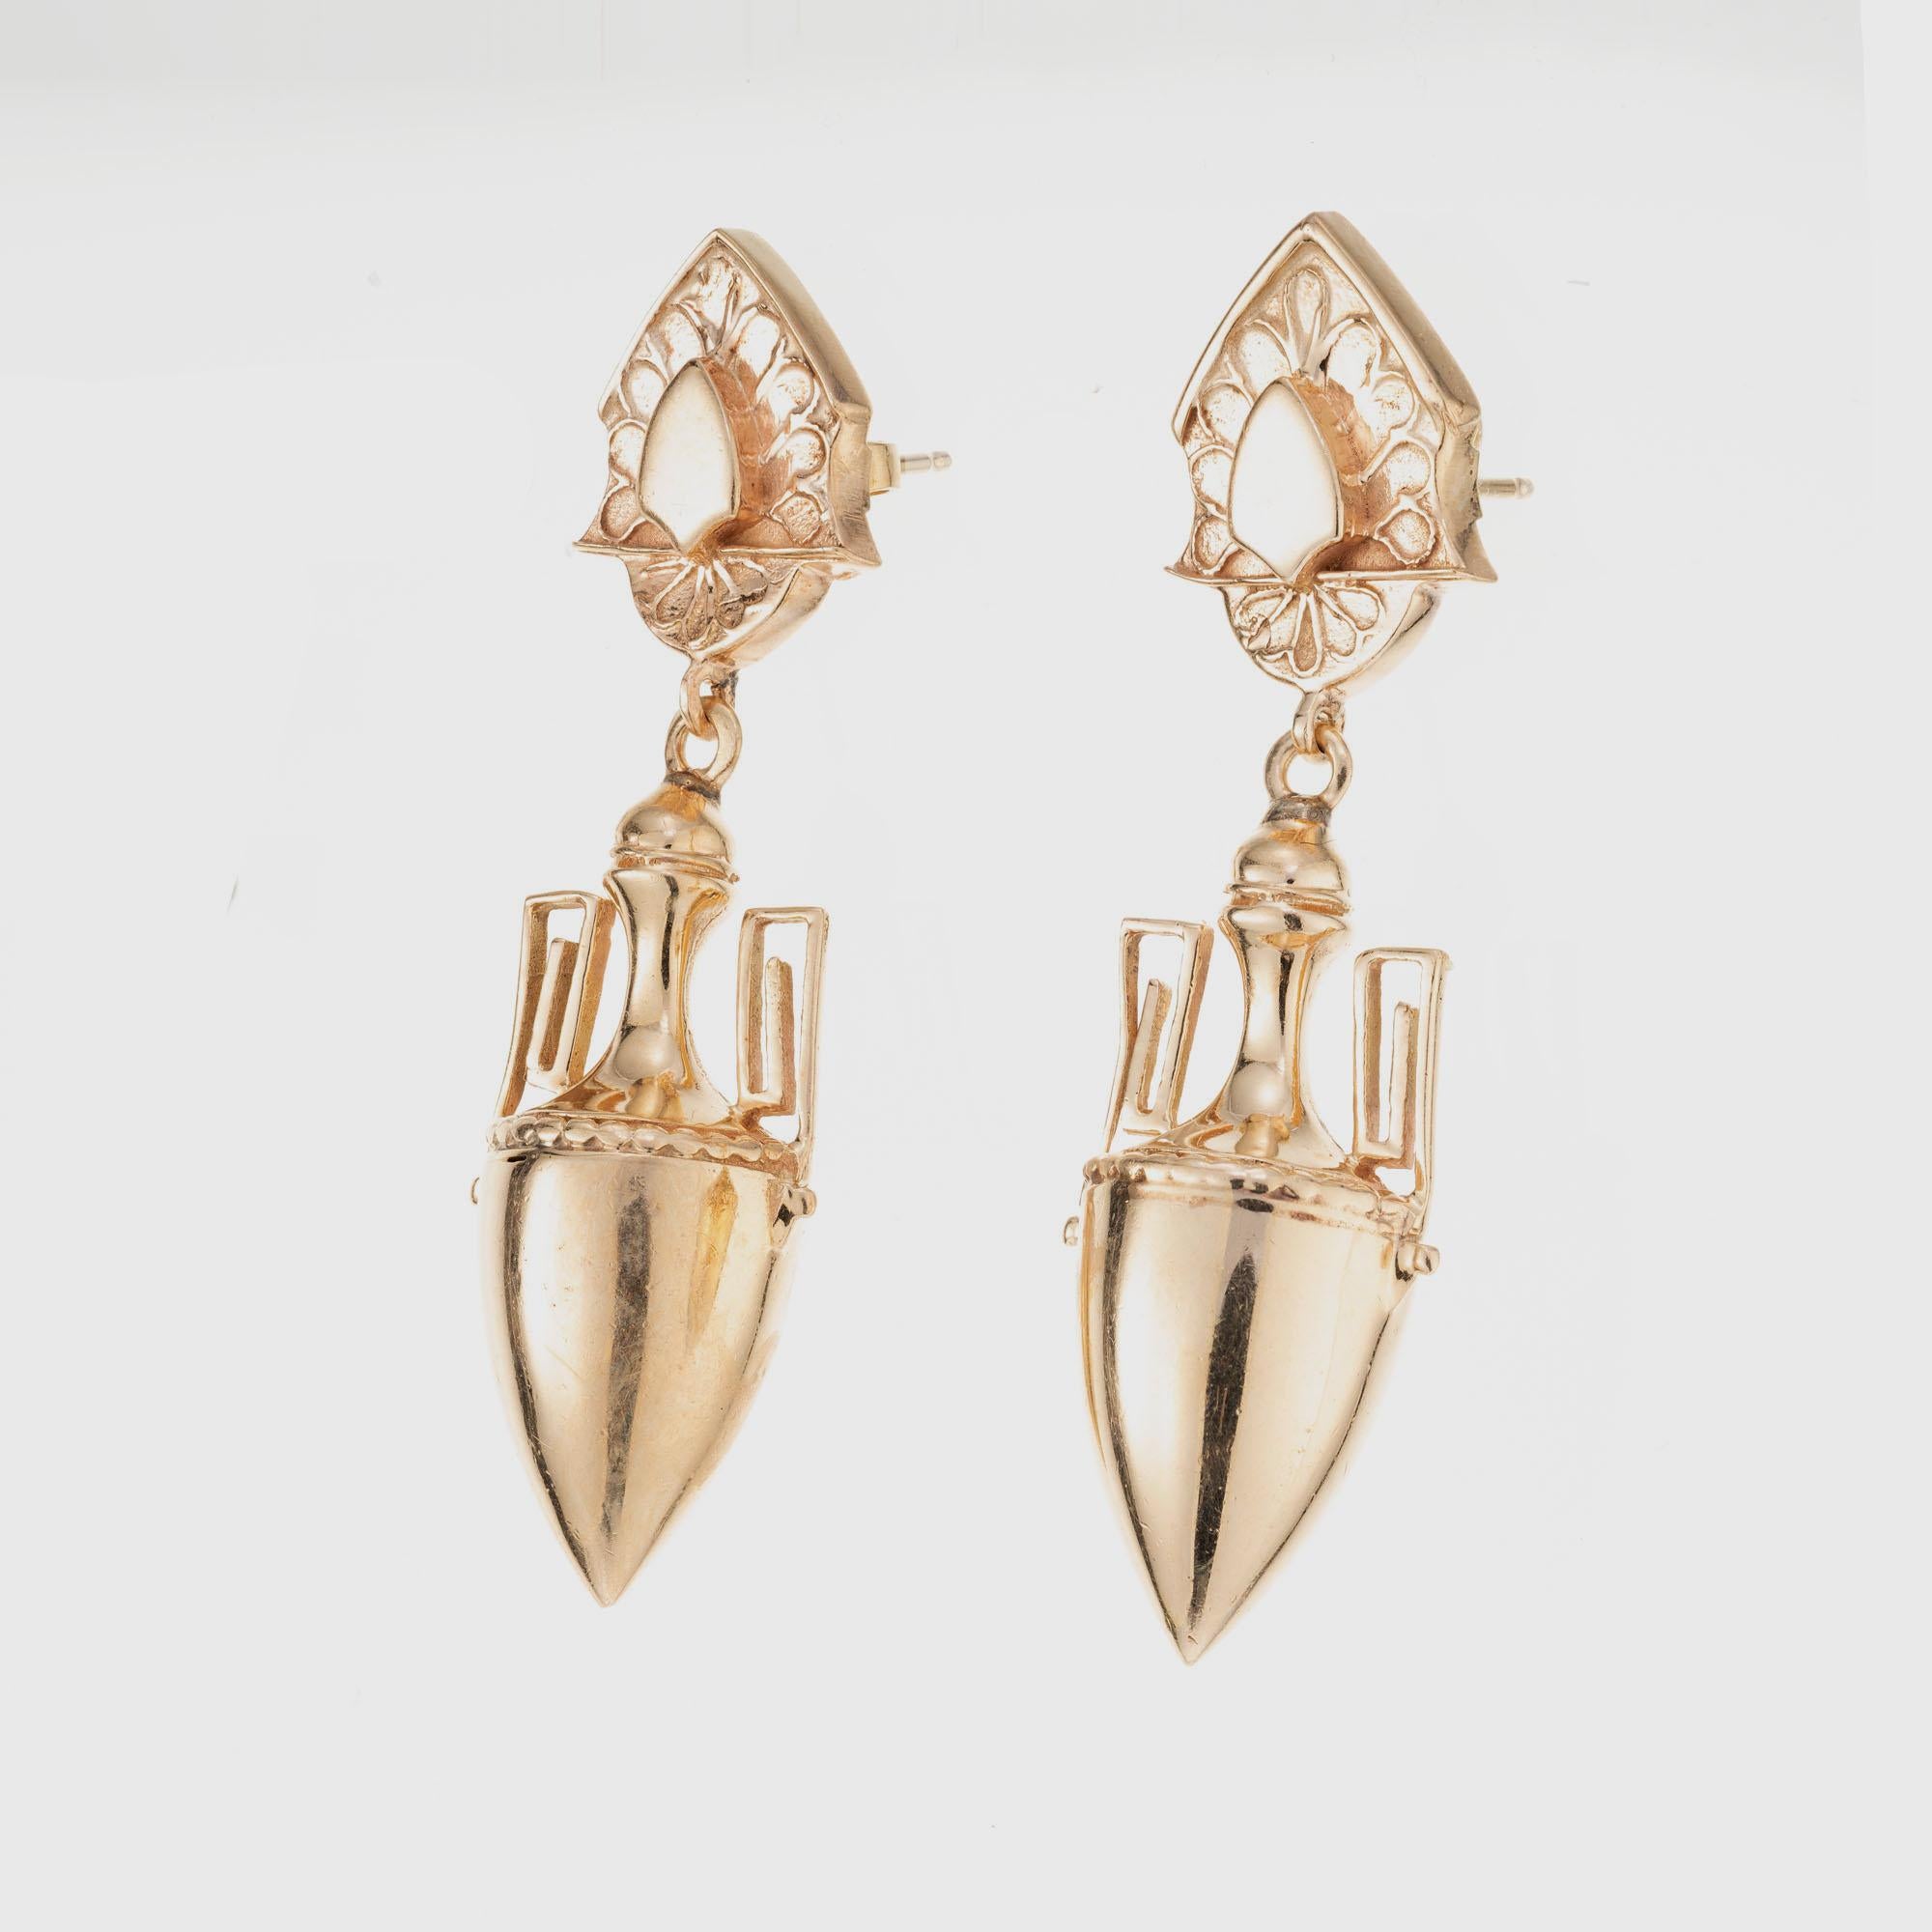 Etruscan revival late 1800’s dangle earrings in 14k rose and yello gold. 

14k rose gold 
14k yellow gold 
14.2 grams
Top to bottom: 47.4mm or 1 7/8 Inch
Width: 13.5mm or .5 Inch
Depth or thickness: 11.0mm

